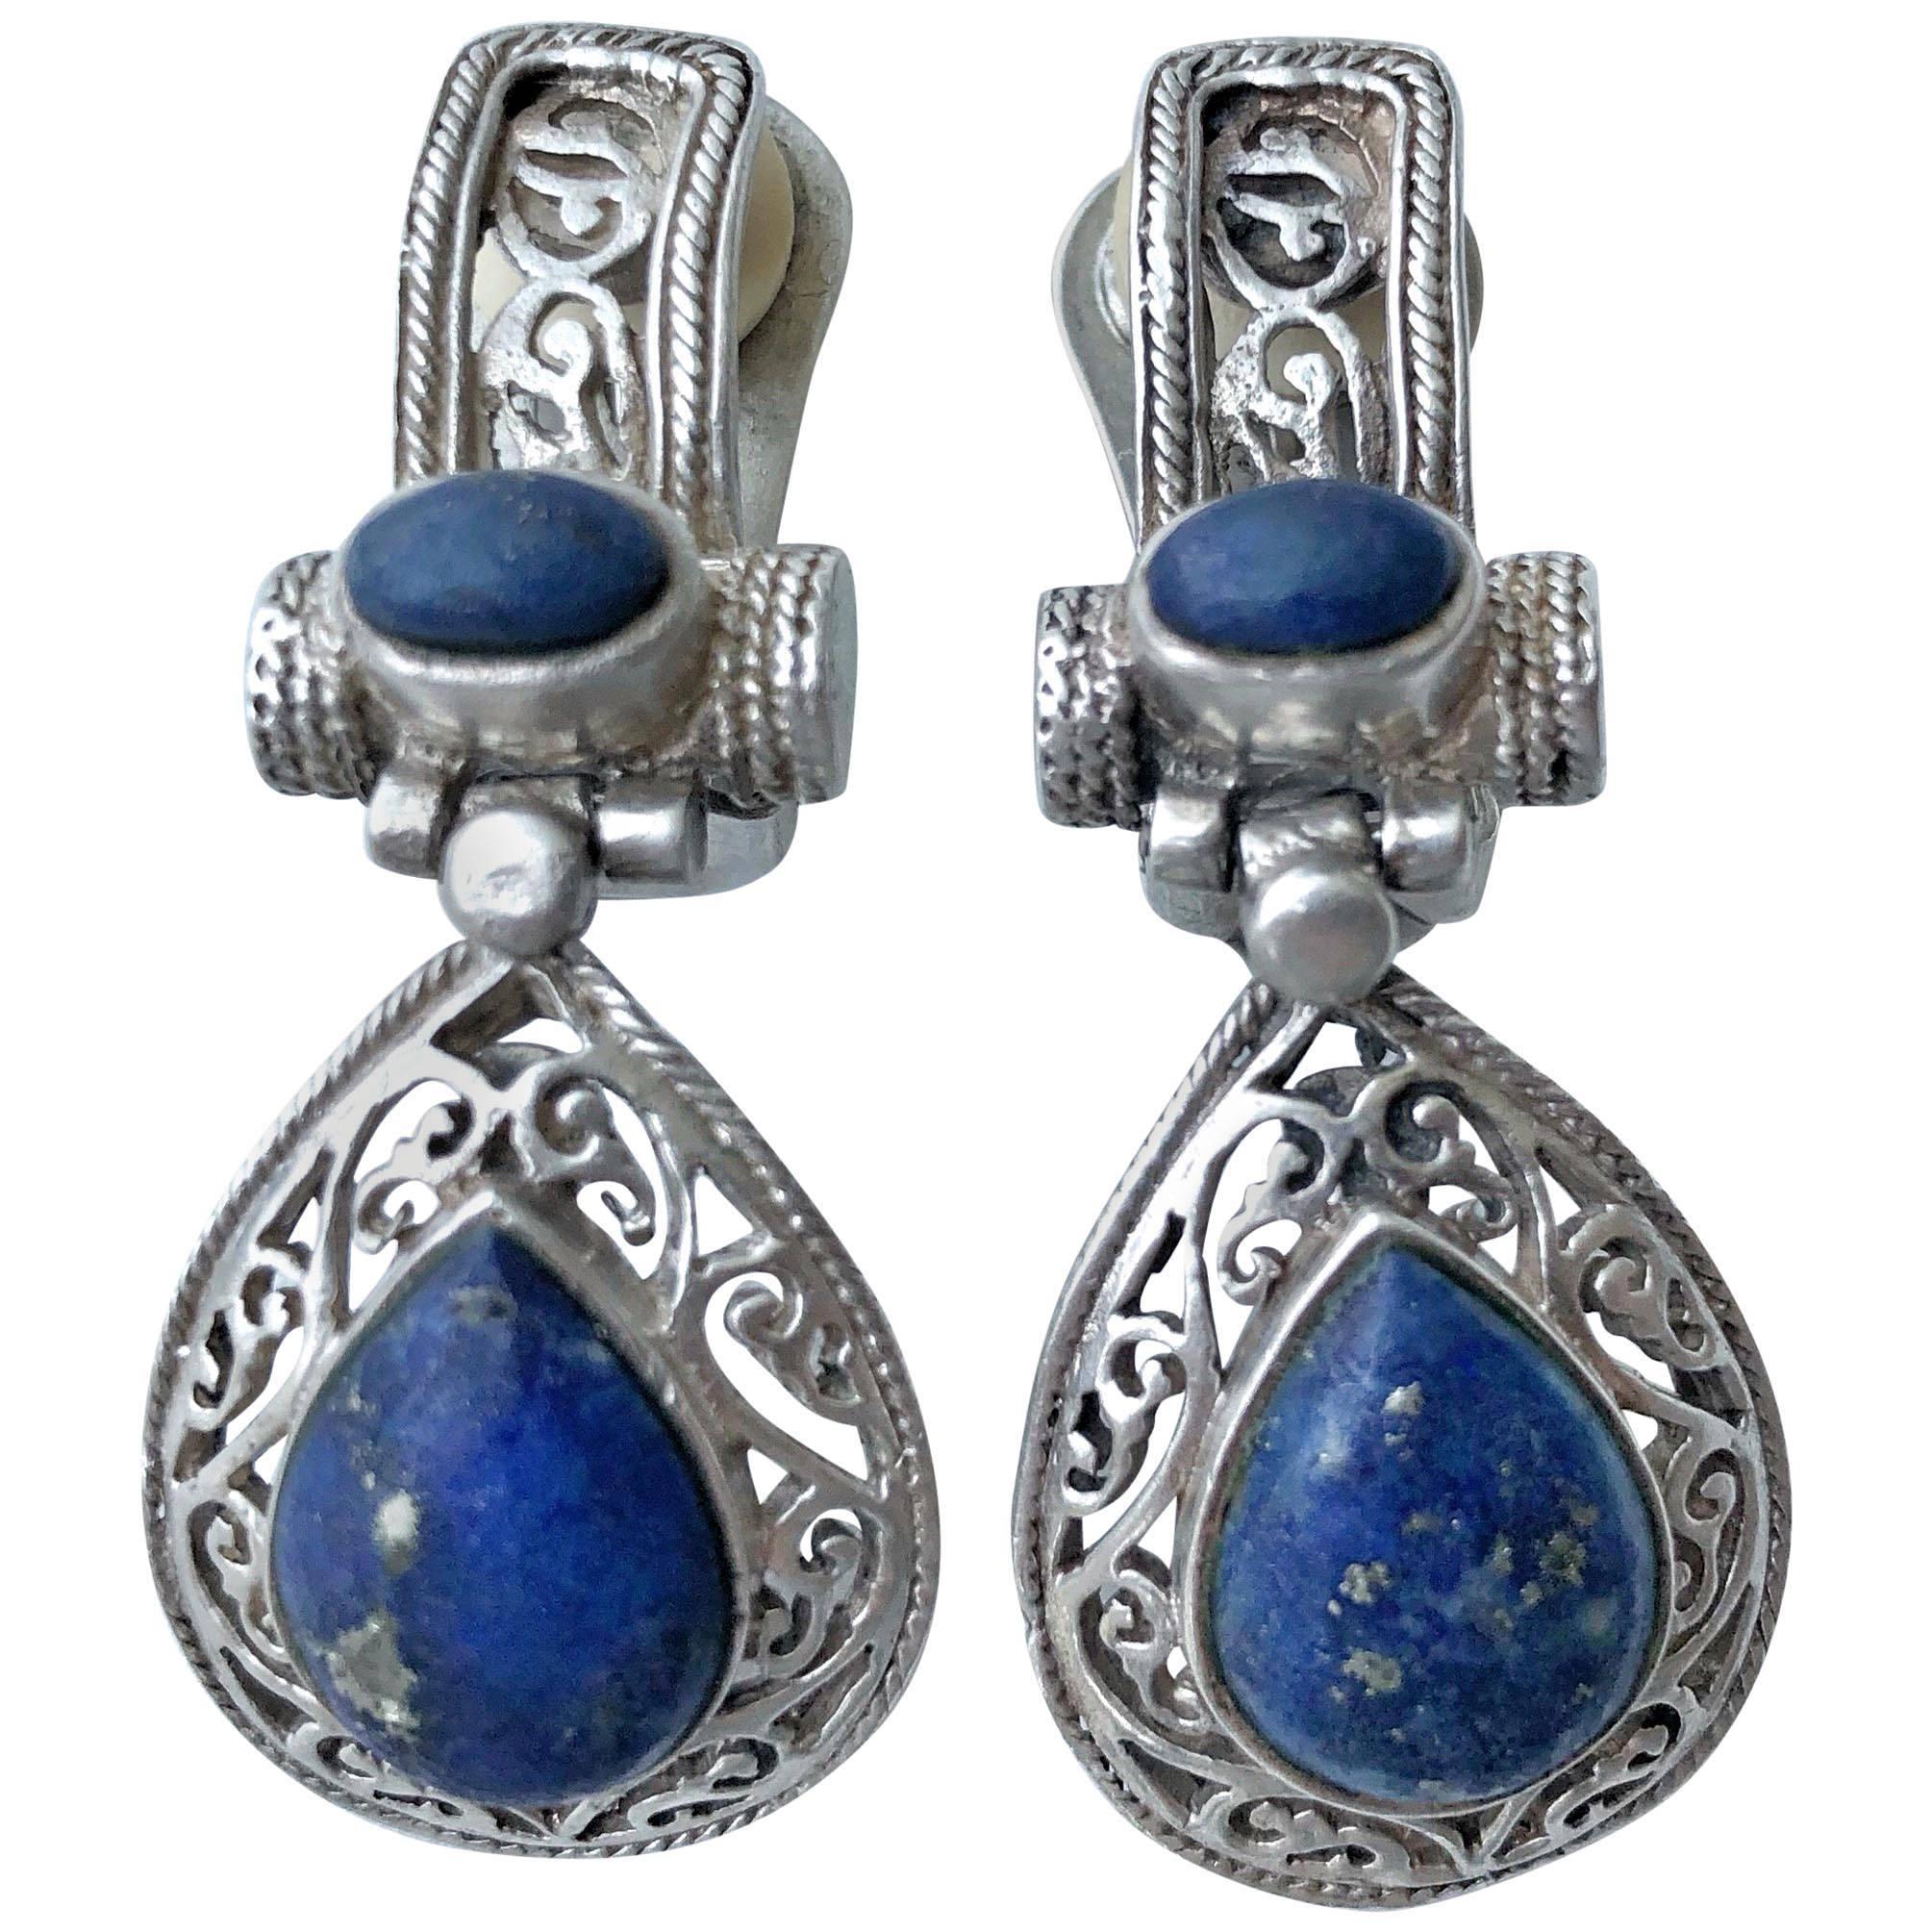 Antique Sterling Silver Earrings Italy Lapis Lazuli